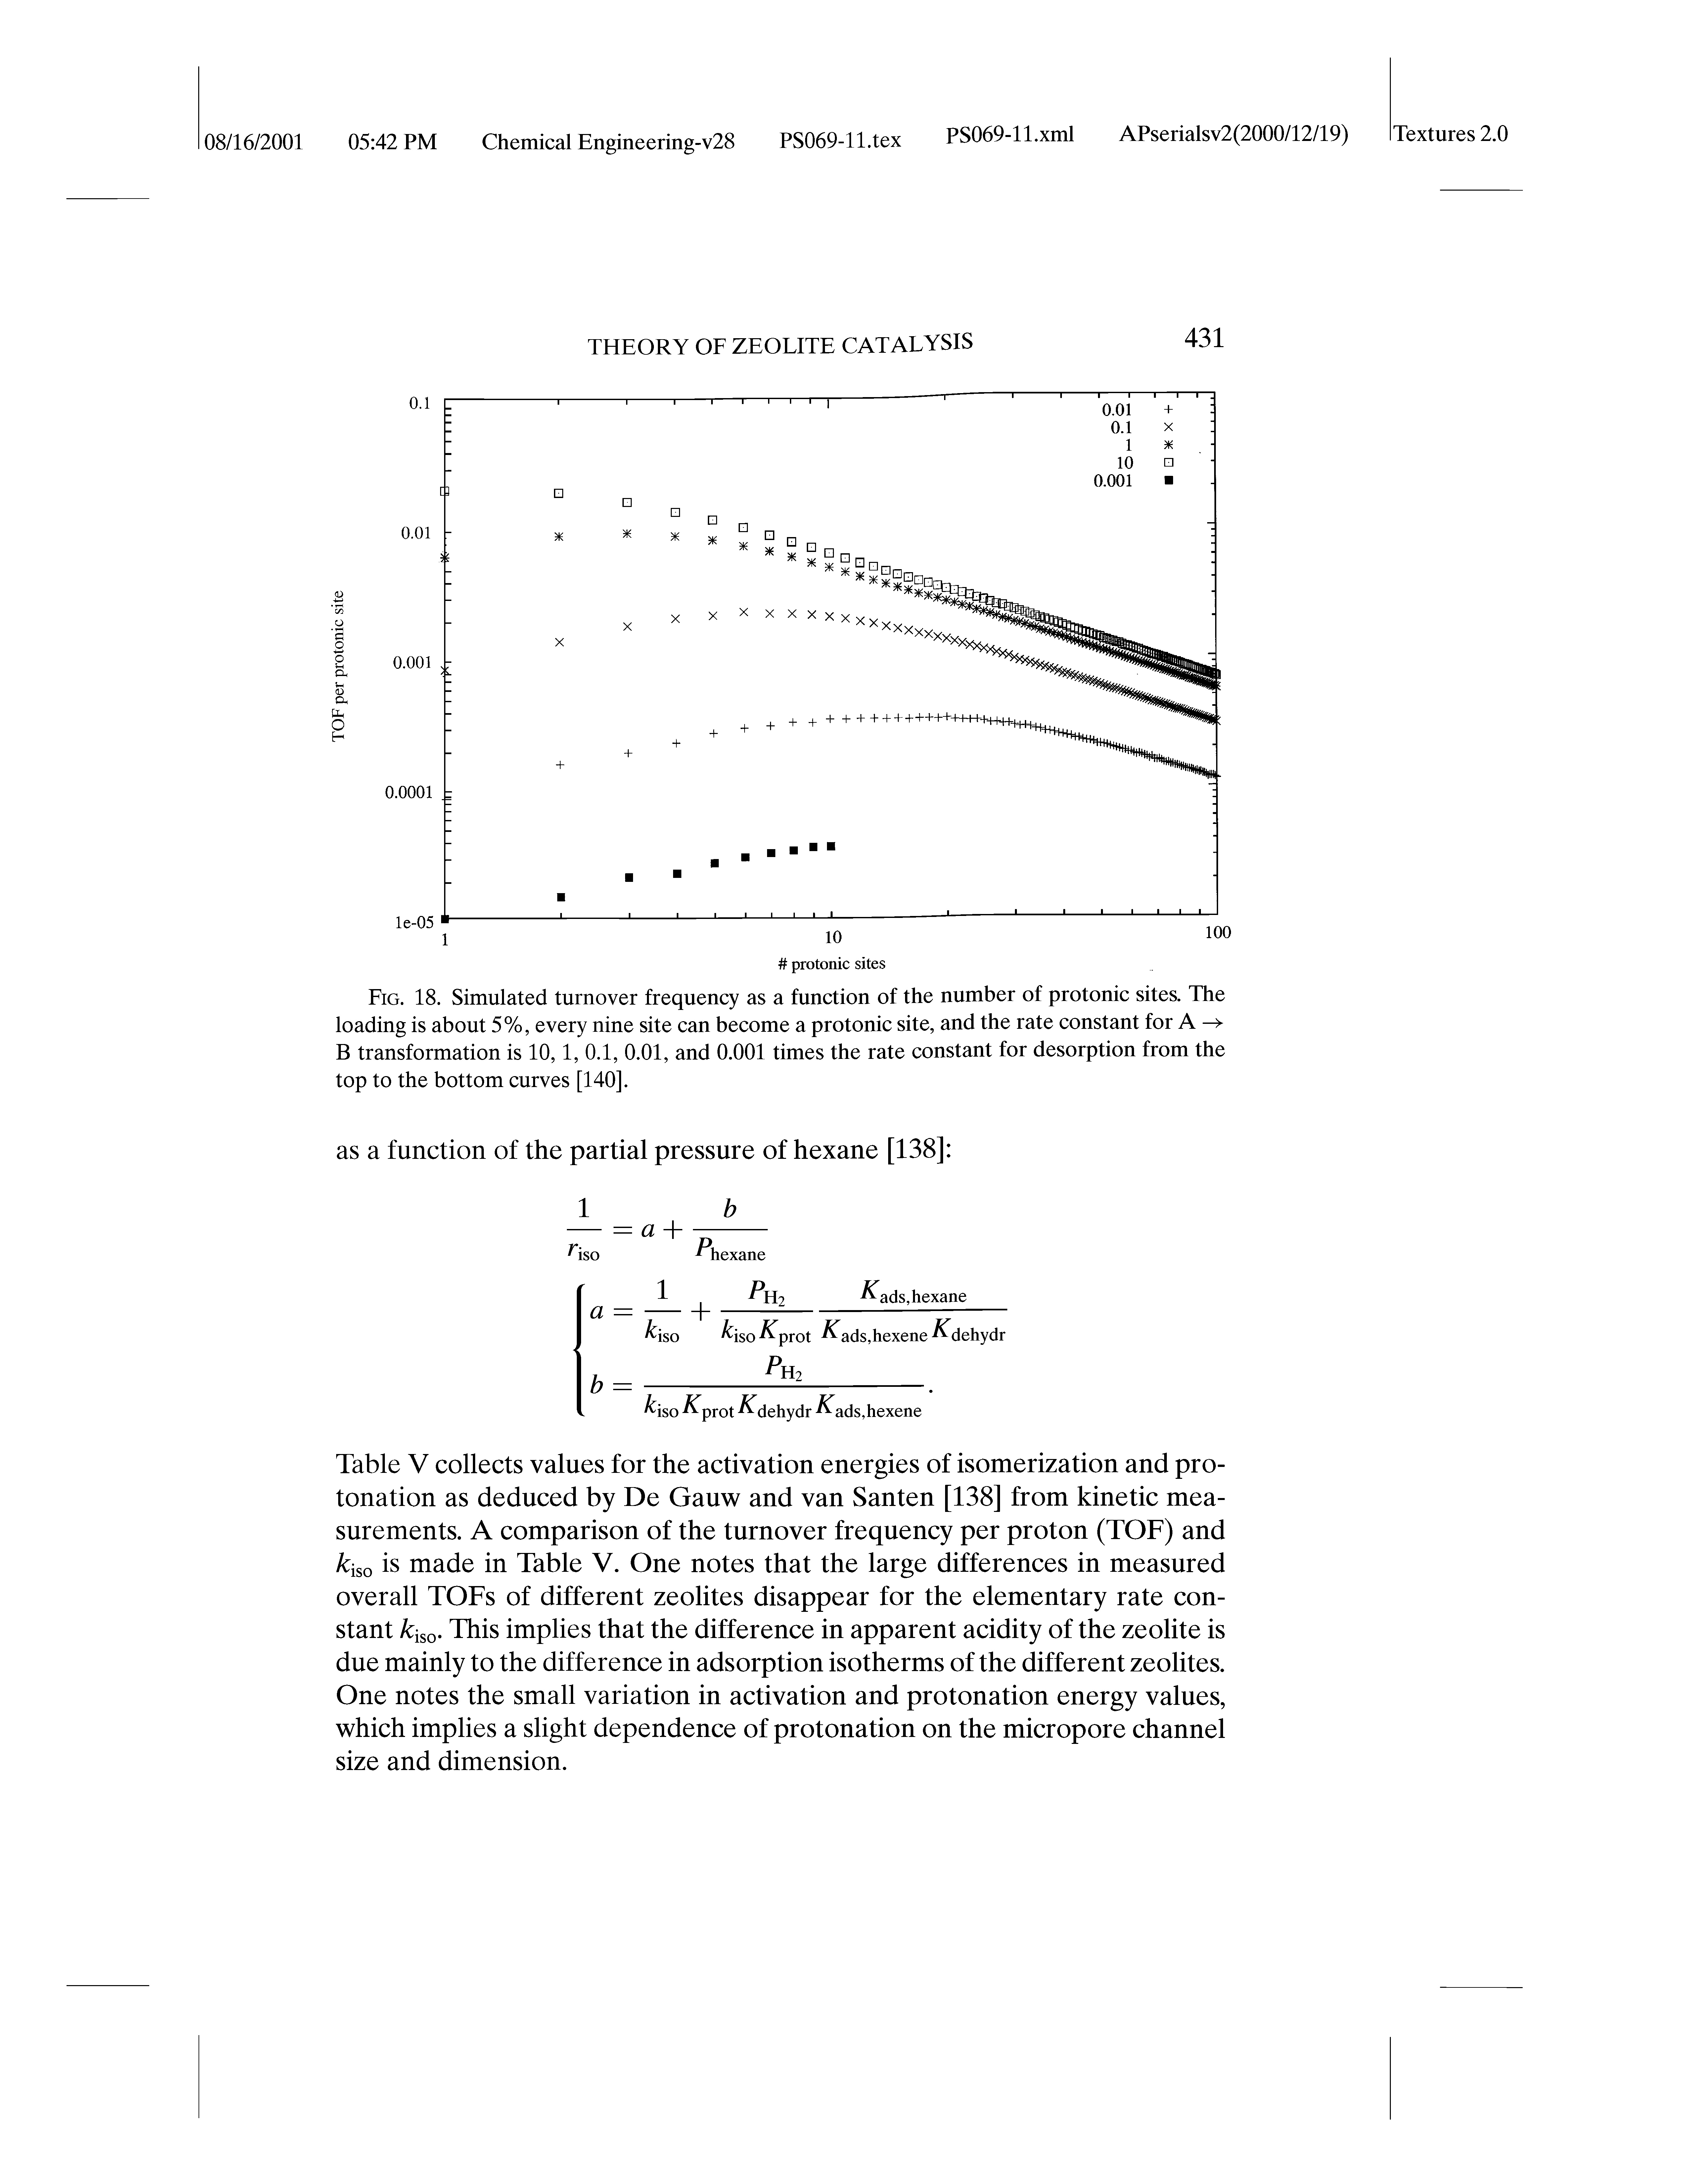 Table V collects values for the activation energies of isomerization and protonation as deduced by De Gauw and van Santen [138] from kinetic measurements. A comparison of the turnover frequency per proton (TOF) and / iso is made in Table V. One notes that the large differences in measured overall TOFs of different zeolites disappear for the elementary rate constant fciso. This implies that the difference in apparent acidity of the zeolite is due mainly to the difference in adsorption isotherms of the different zeolites. One notes the small variation in activation and protonation energy values, which implies a slight dependence of protonation on the micropore channel size and dimension.